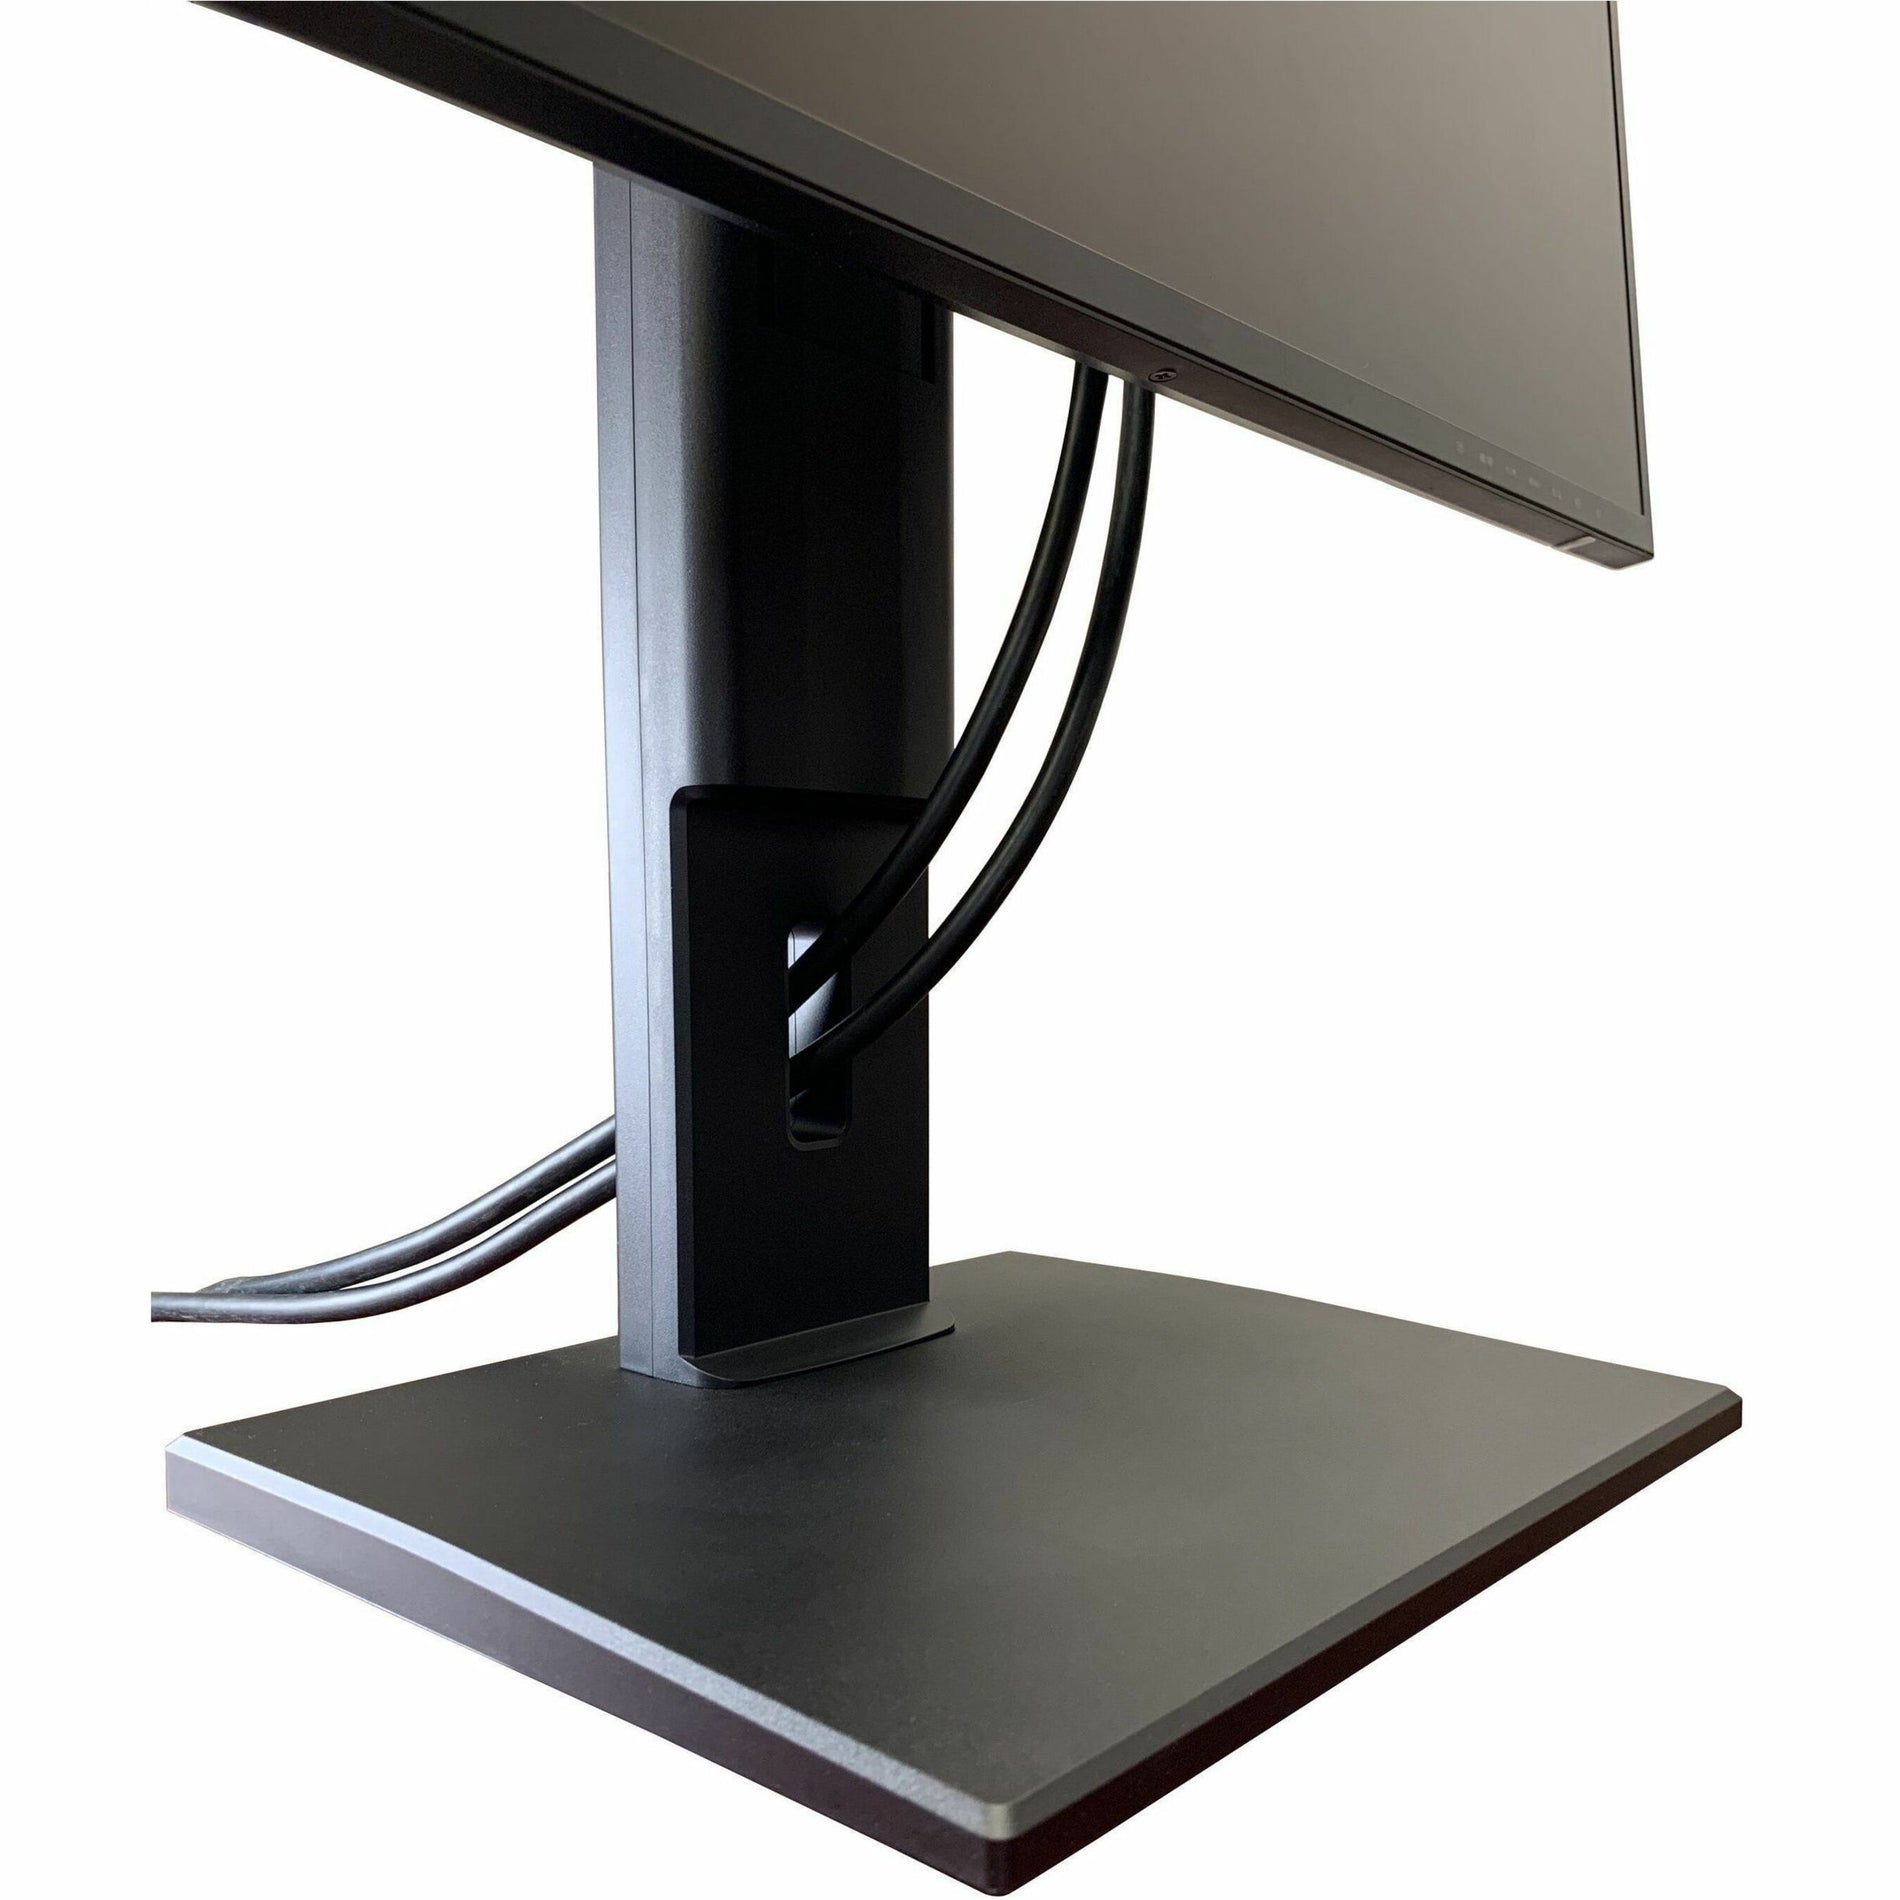 Amer Mounts AMR1SH Single Flat Panel Monitor Stand With VESA Mounting Support, Tilt, Ergonomic, Lightweight, Cable Management, Rotate, 360° Swivel Base